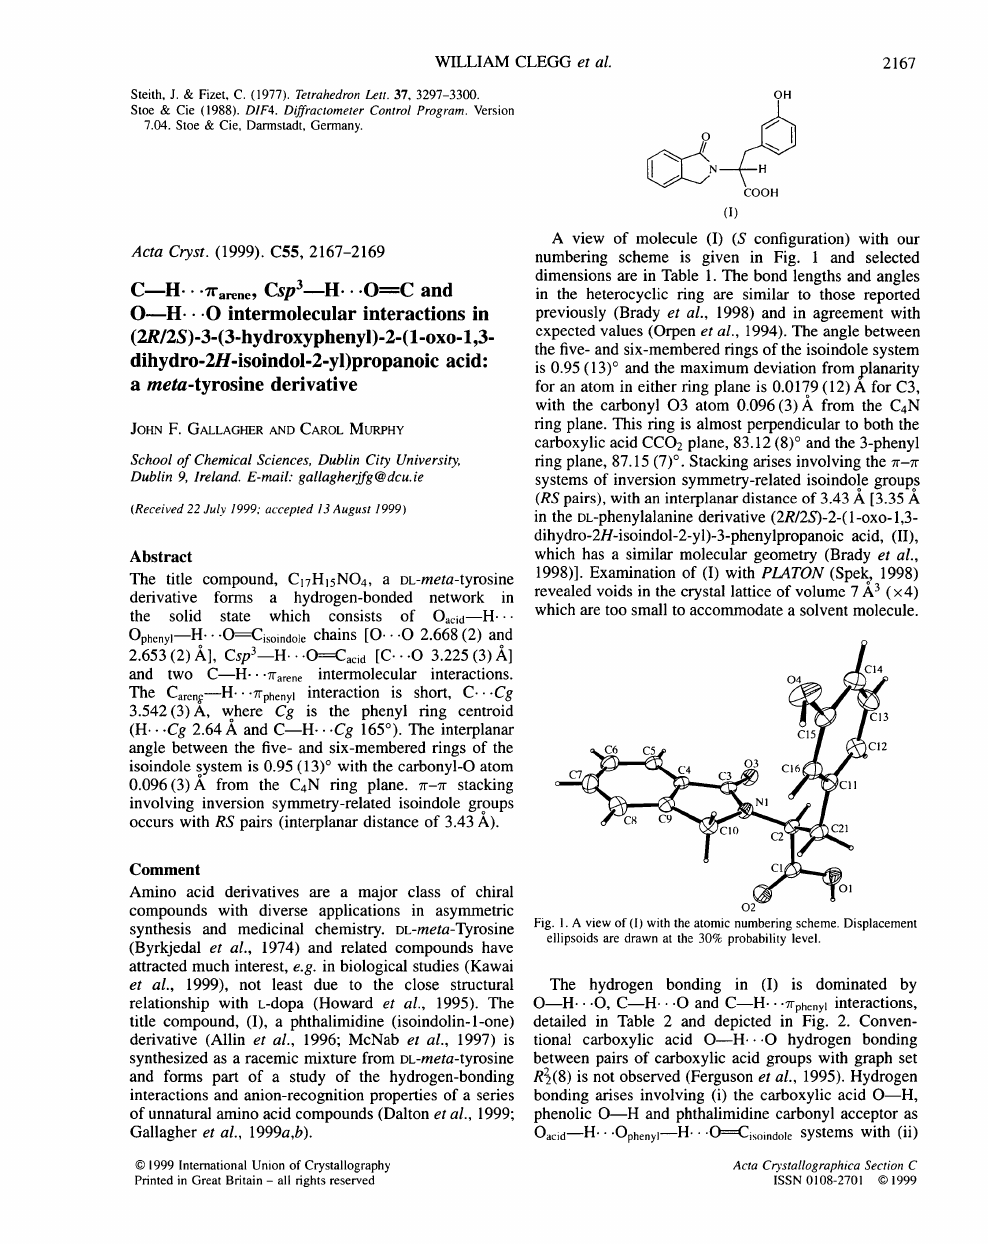 C H P Arene C Sp 3 H O C And O H O Intermolecular Interactions In 2 R 2 S 3 3 Hydroxyphenyl 2 1 Oxo 1 3 Dihydro 2 H Isoindol 2 Yl Propanoic Acid A Meta Tyrosine Derivative Topic Of Research Paper In Chemical Sciences